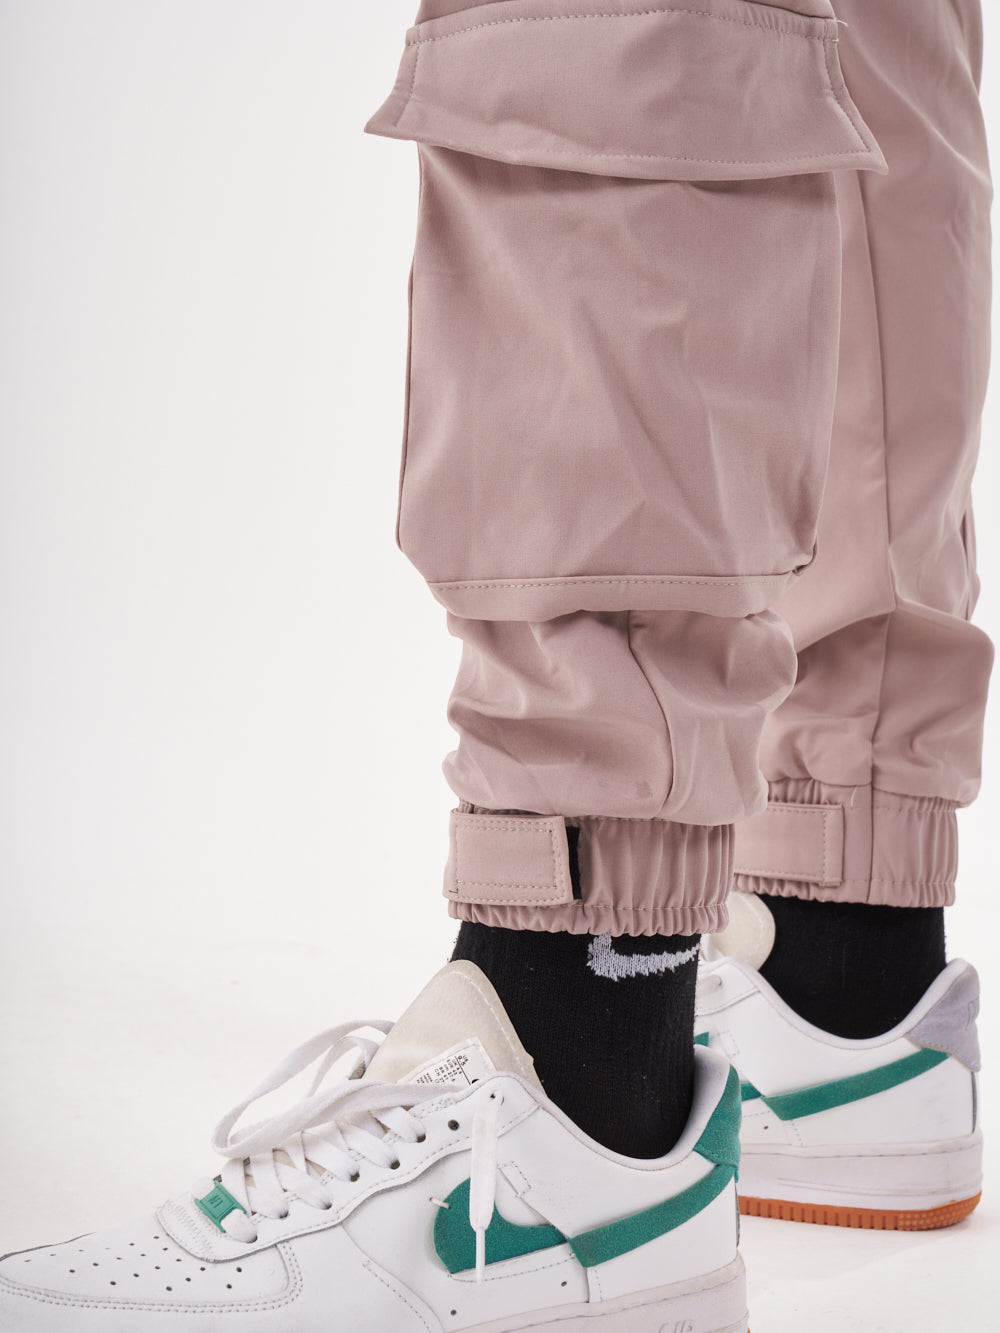 A man wearing a pair of SPUNK JOGGERS | MAUVE cargo pants and white sneakers.